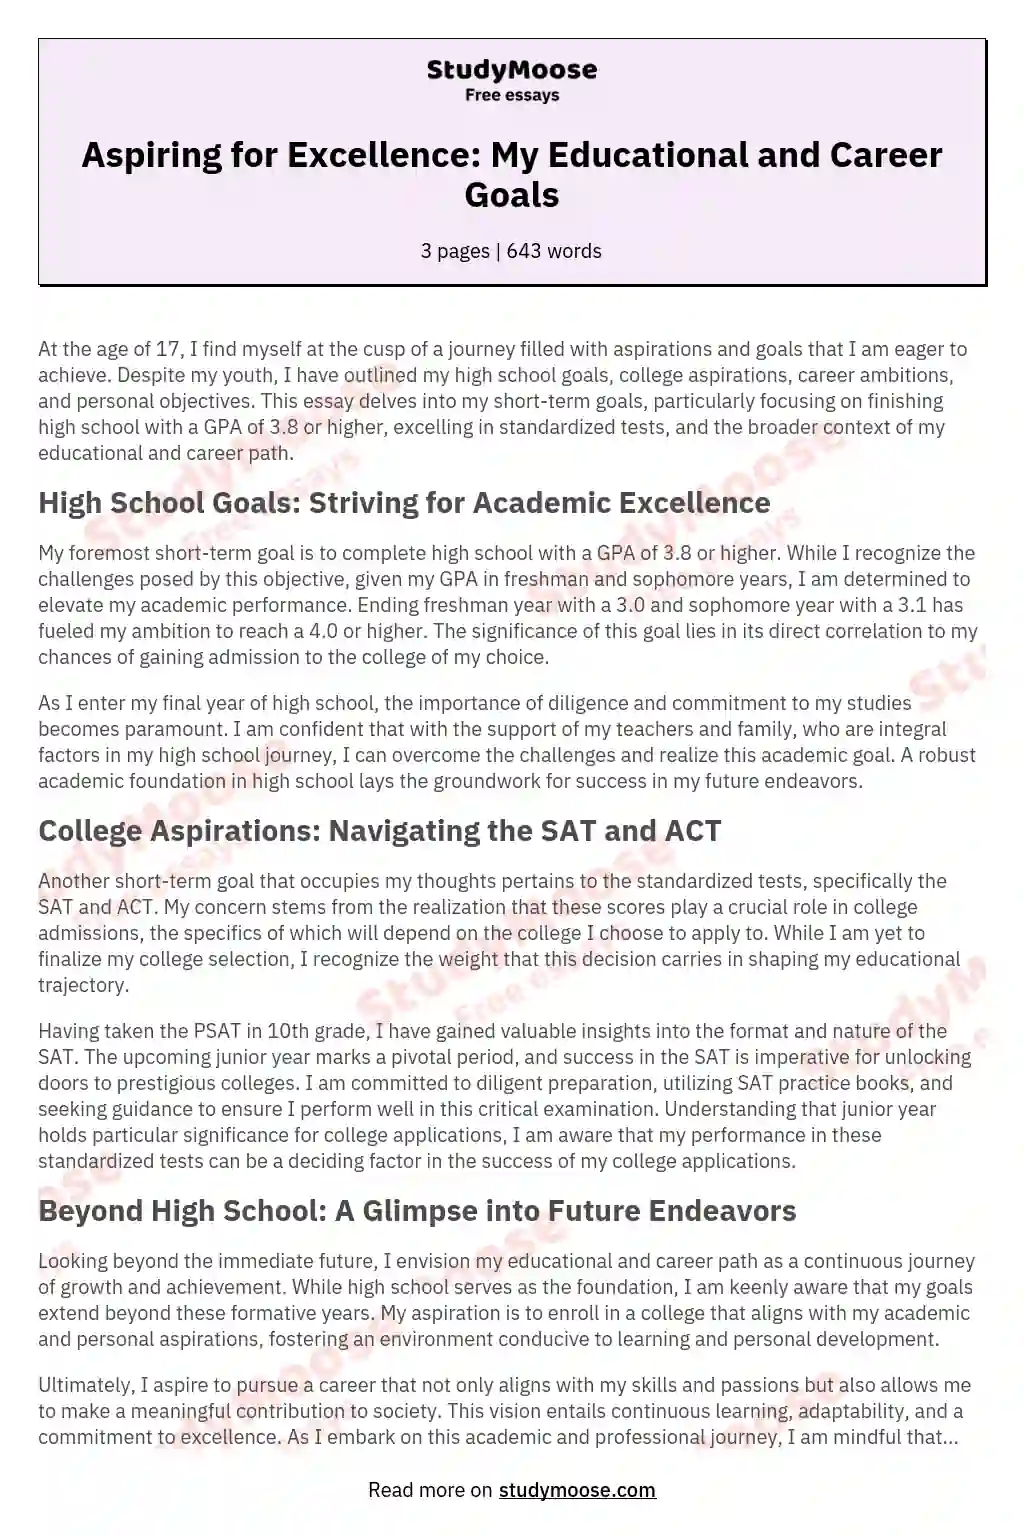 Aspiring for Excellence: My Educational and Career Goals essay